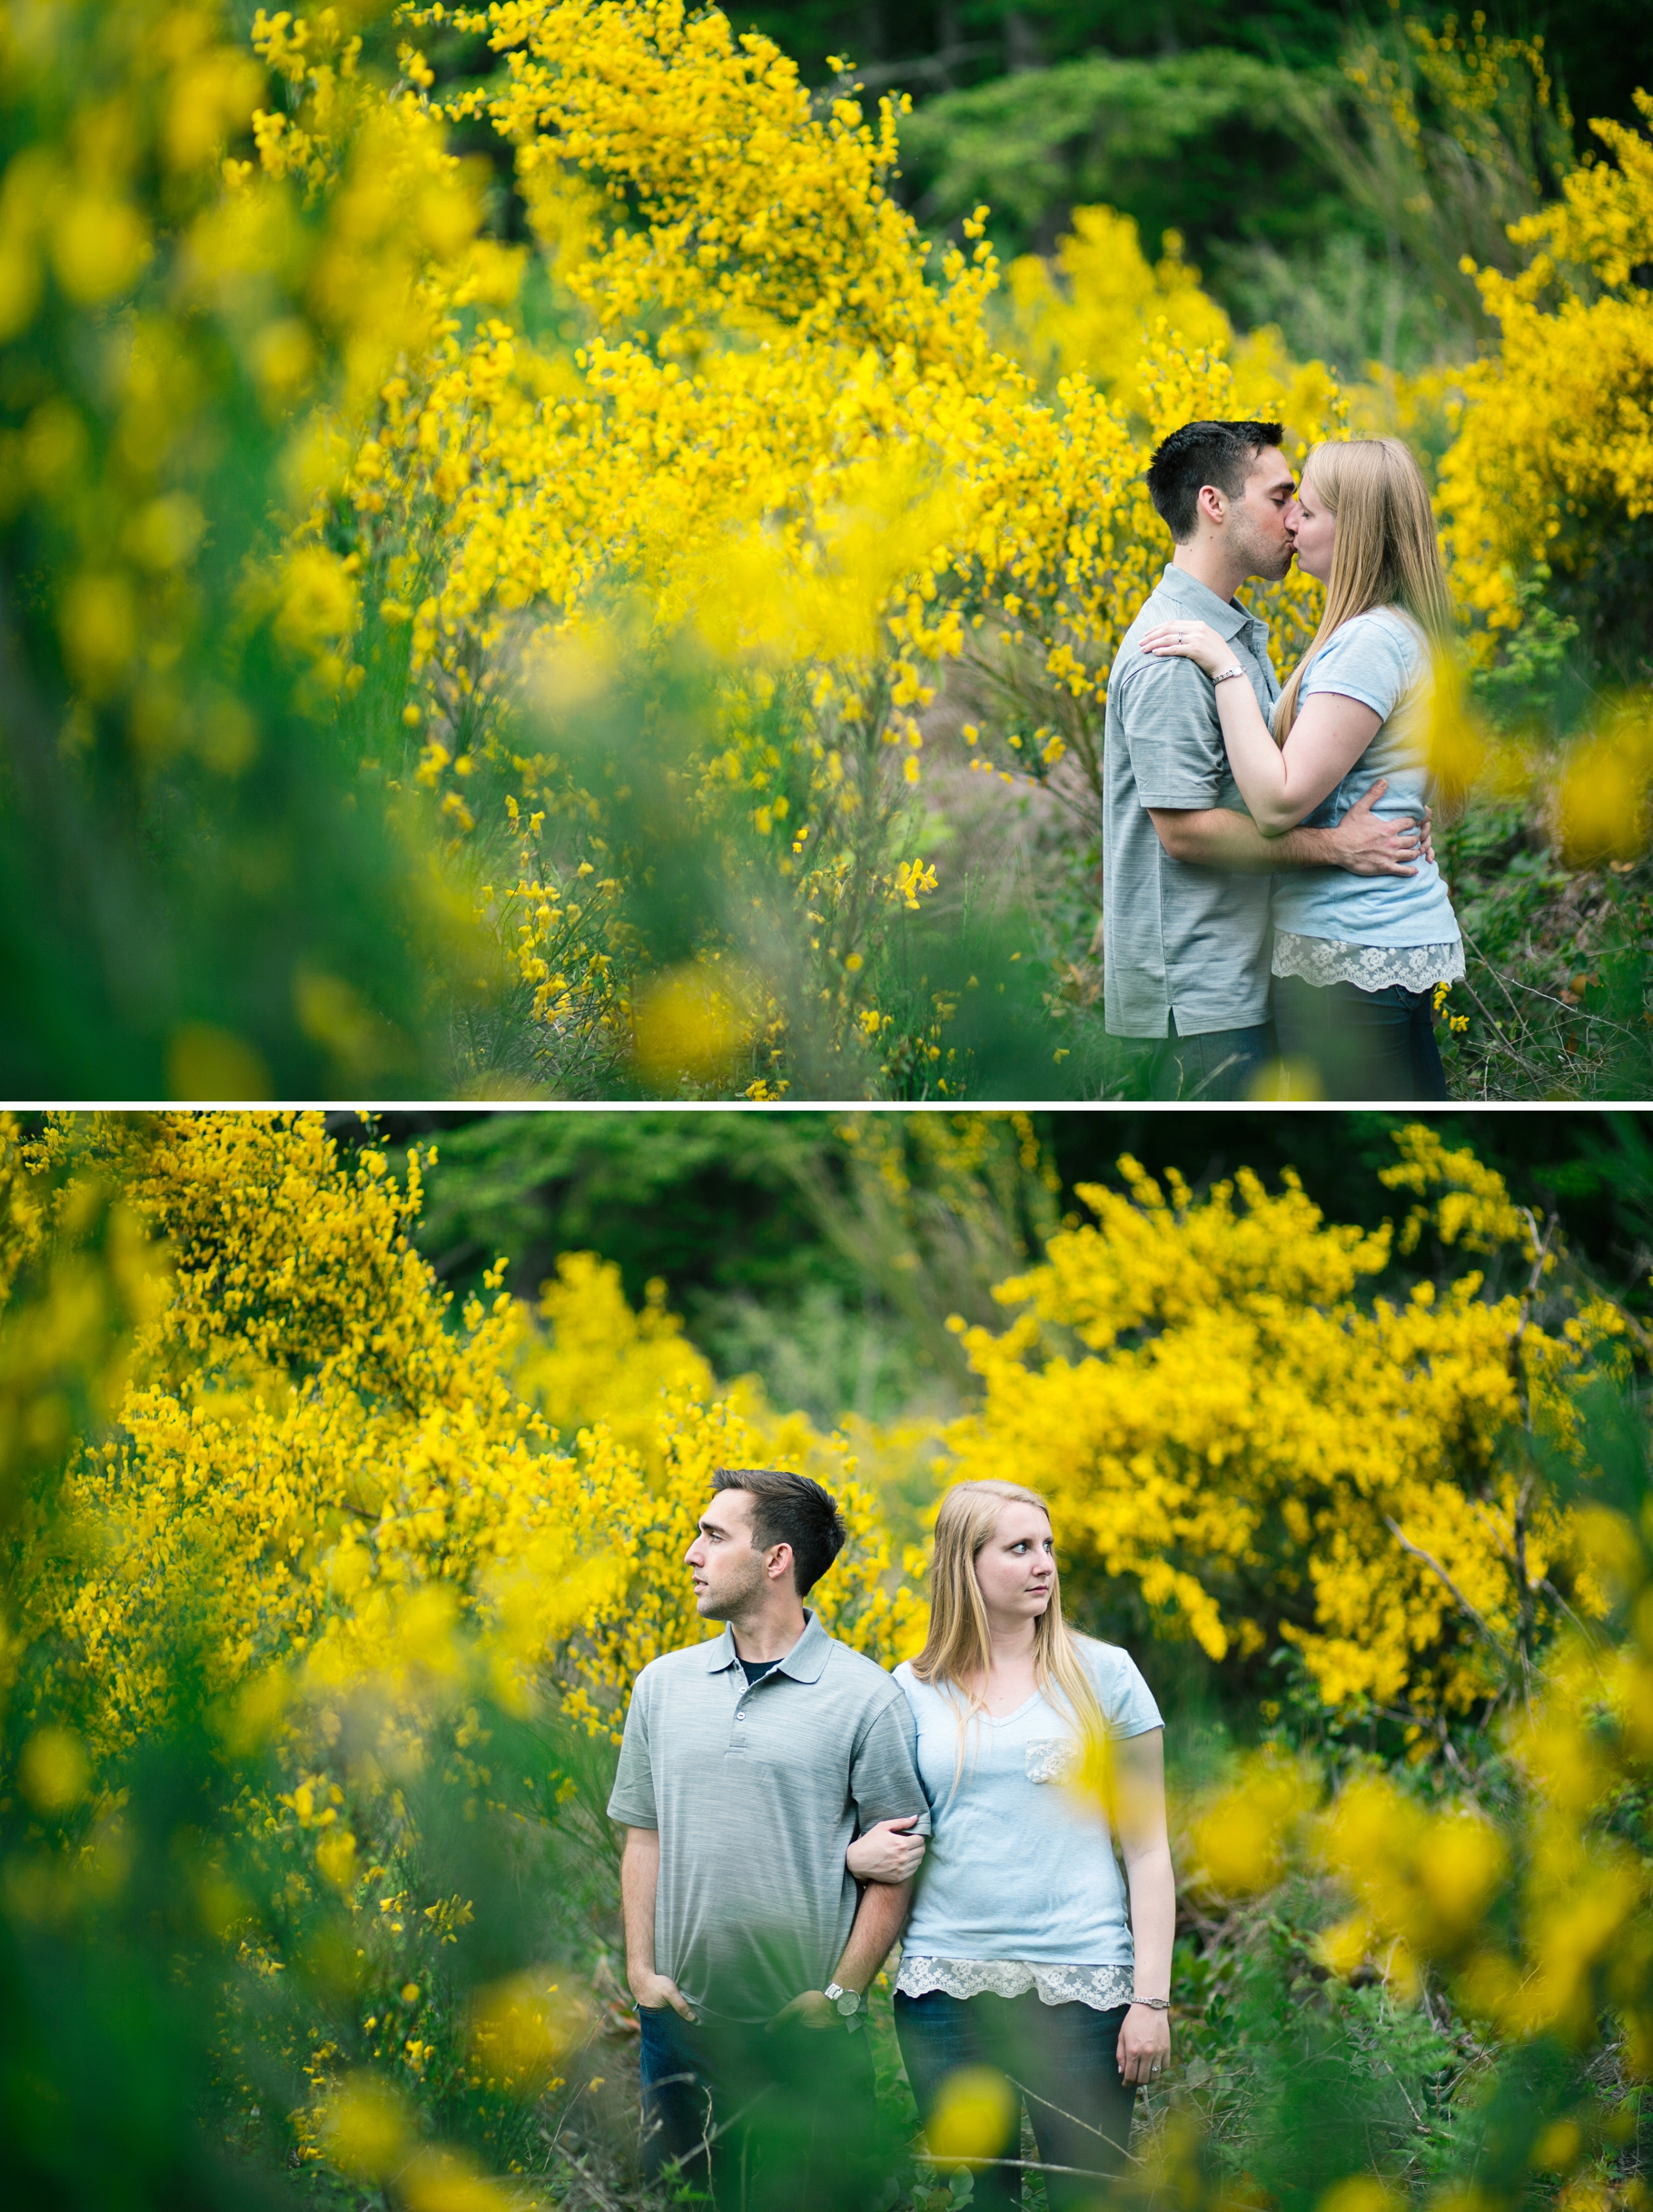 11-Issaquah-Hiking-Engagement-Photographer-Photos-Tradition-Lake-Loop-Trail-Yellow-Wild-Flowers-Seattle-Wedding-Photography-by-Betty-Elaine